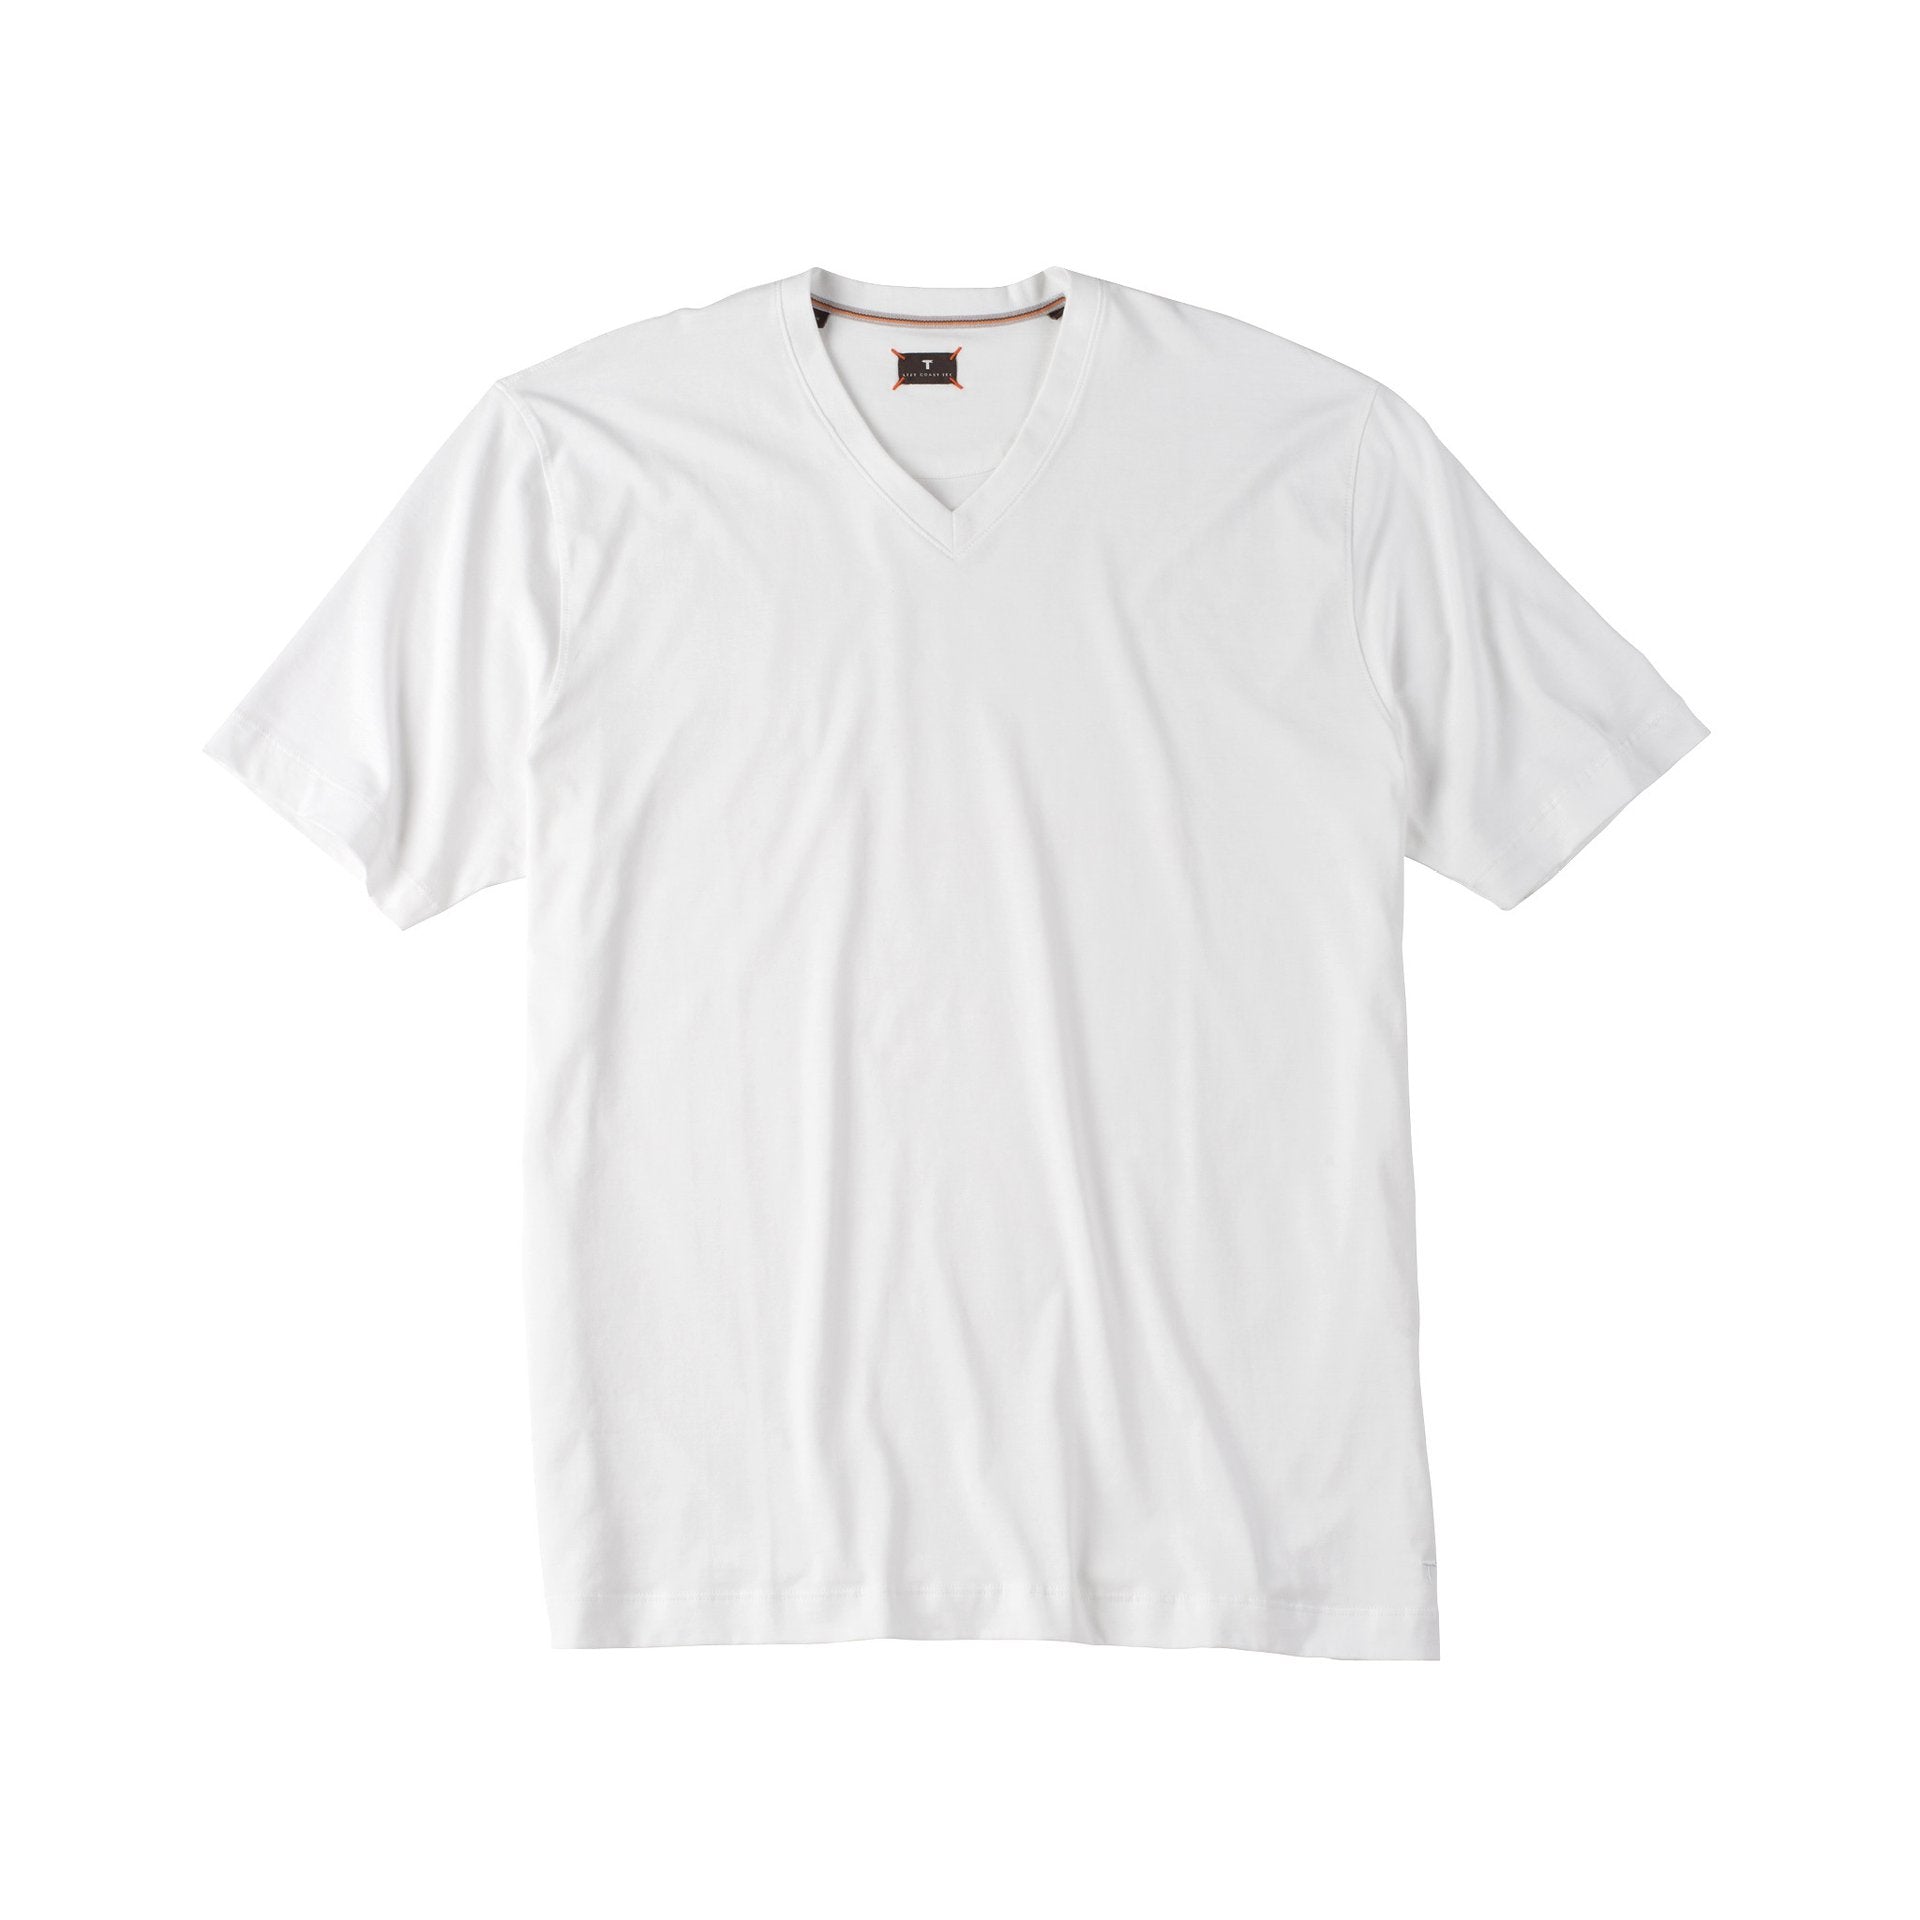 V-Neck Peruvian Cotton Tee Shirt in White by Left Coast Tee